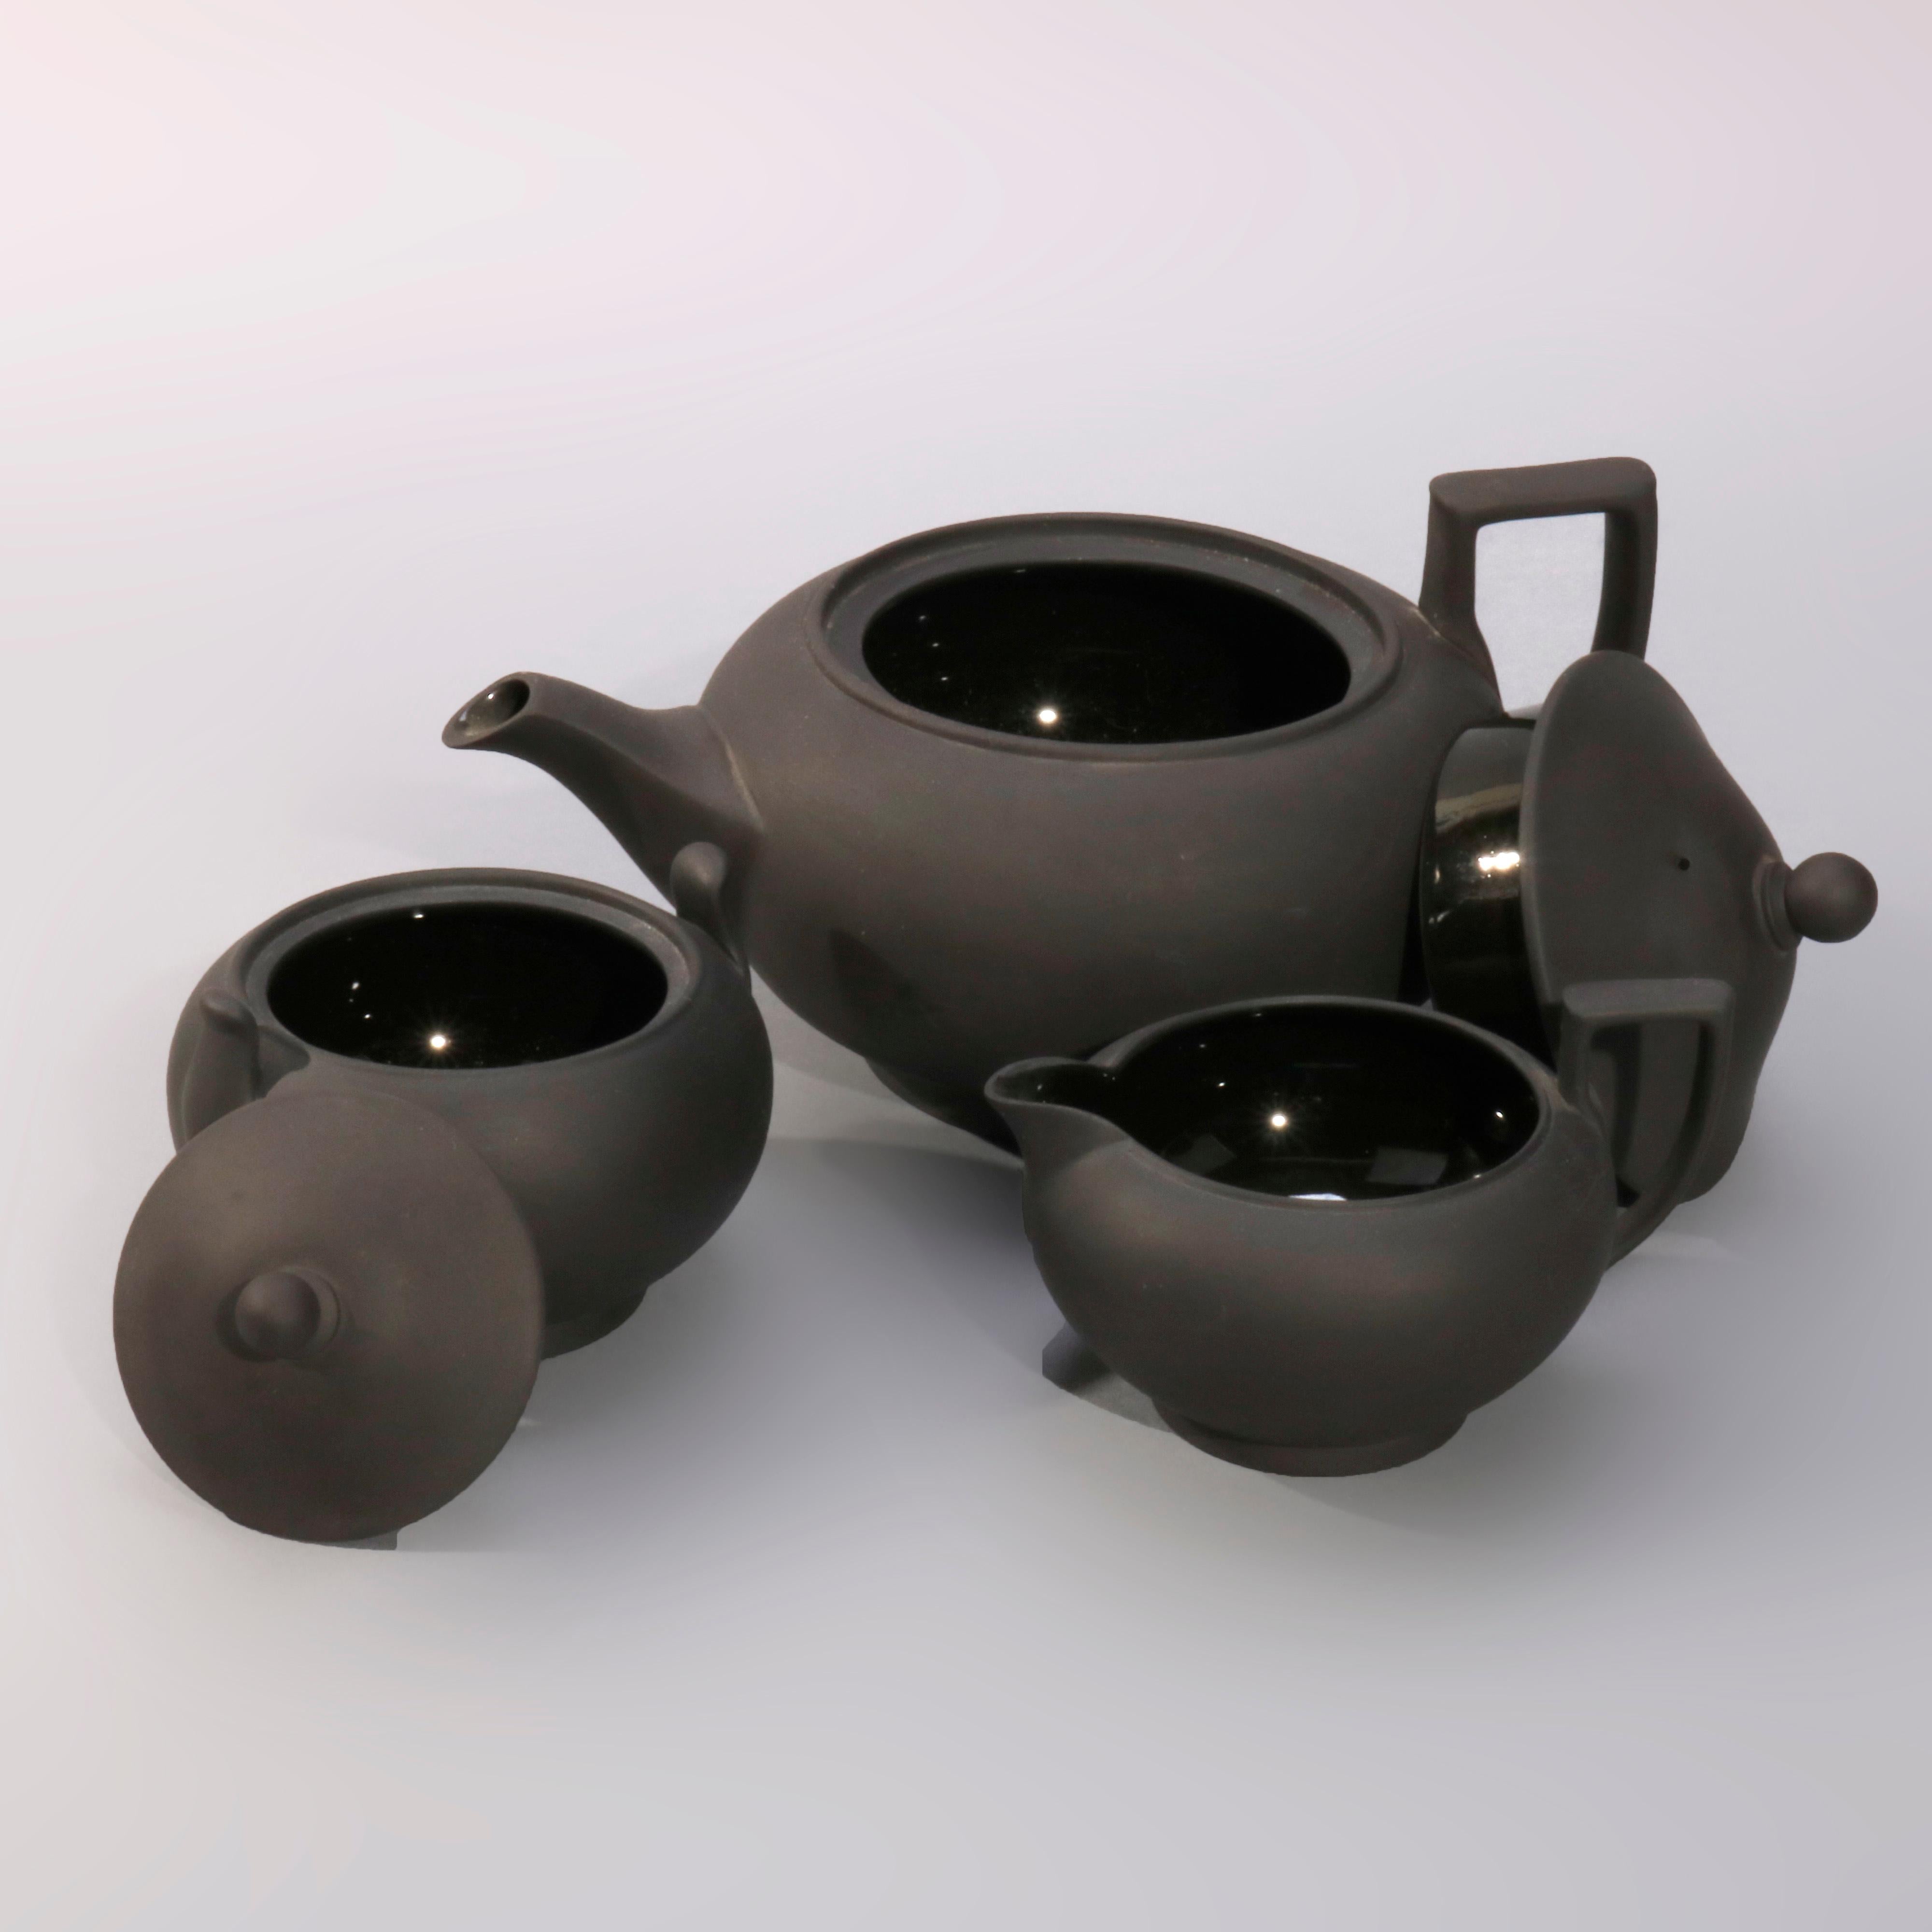 An antique English black basalt stoneware 3-piece teapot set by Wedgwood offers matte exteriors with glazed interiors and includes footed teapot, lidded sugar and creamer, two items stamped Wedgwood on base as photographed, 19th century

Measures-